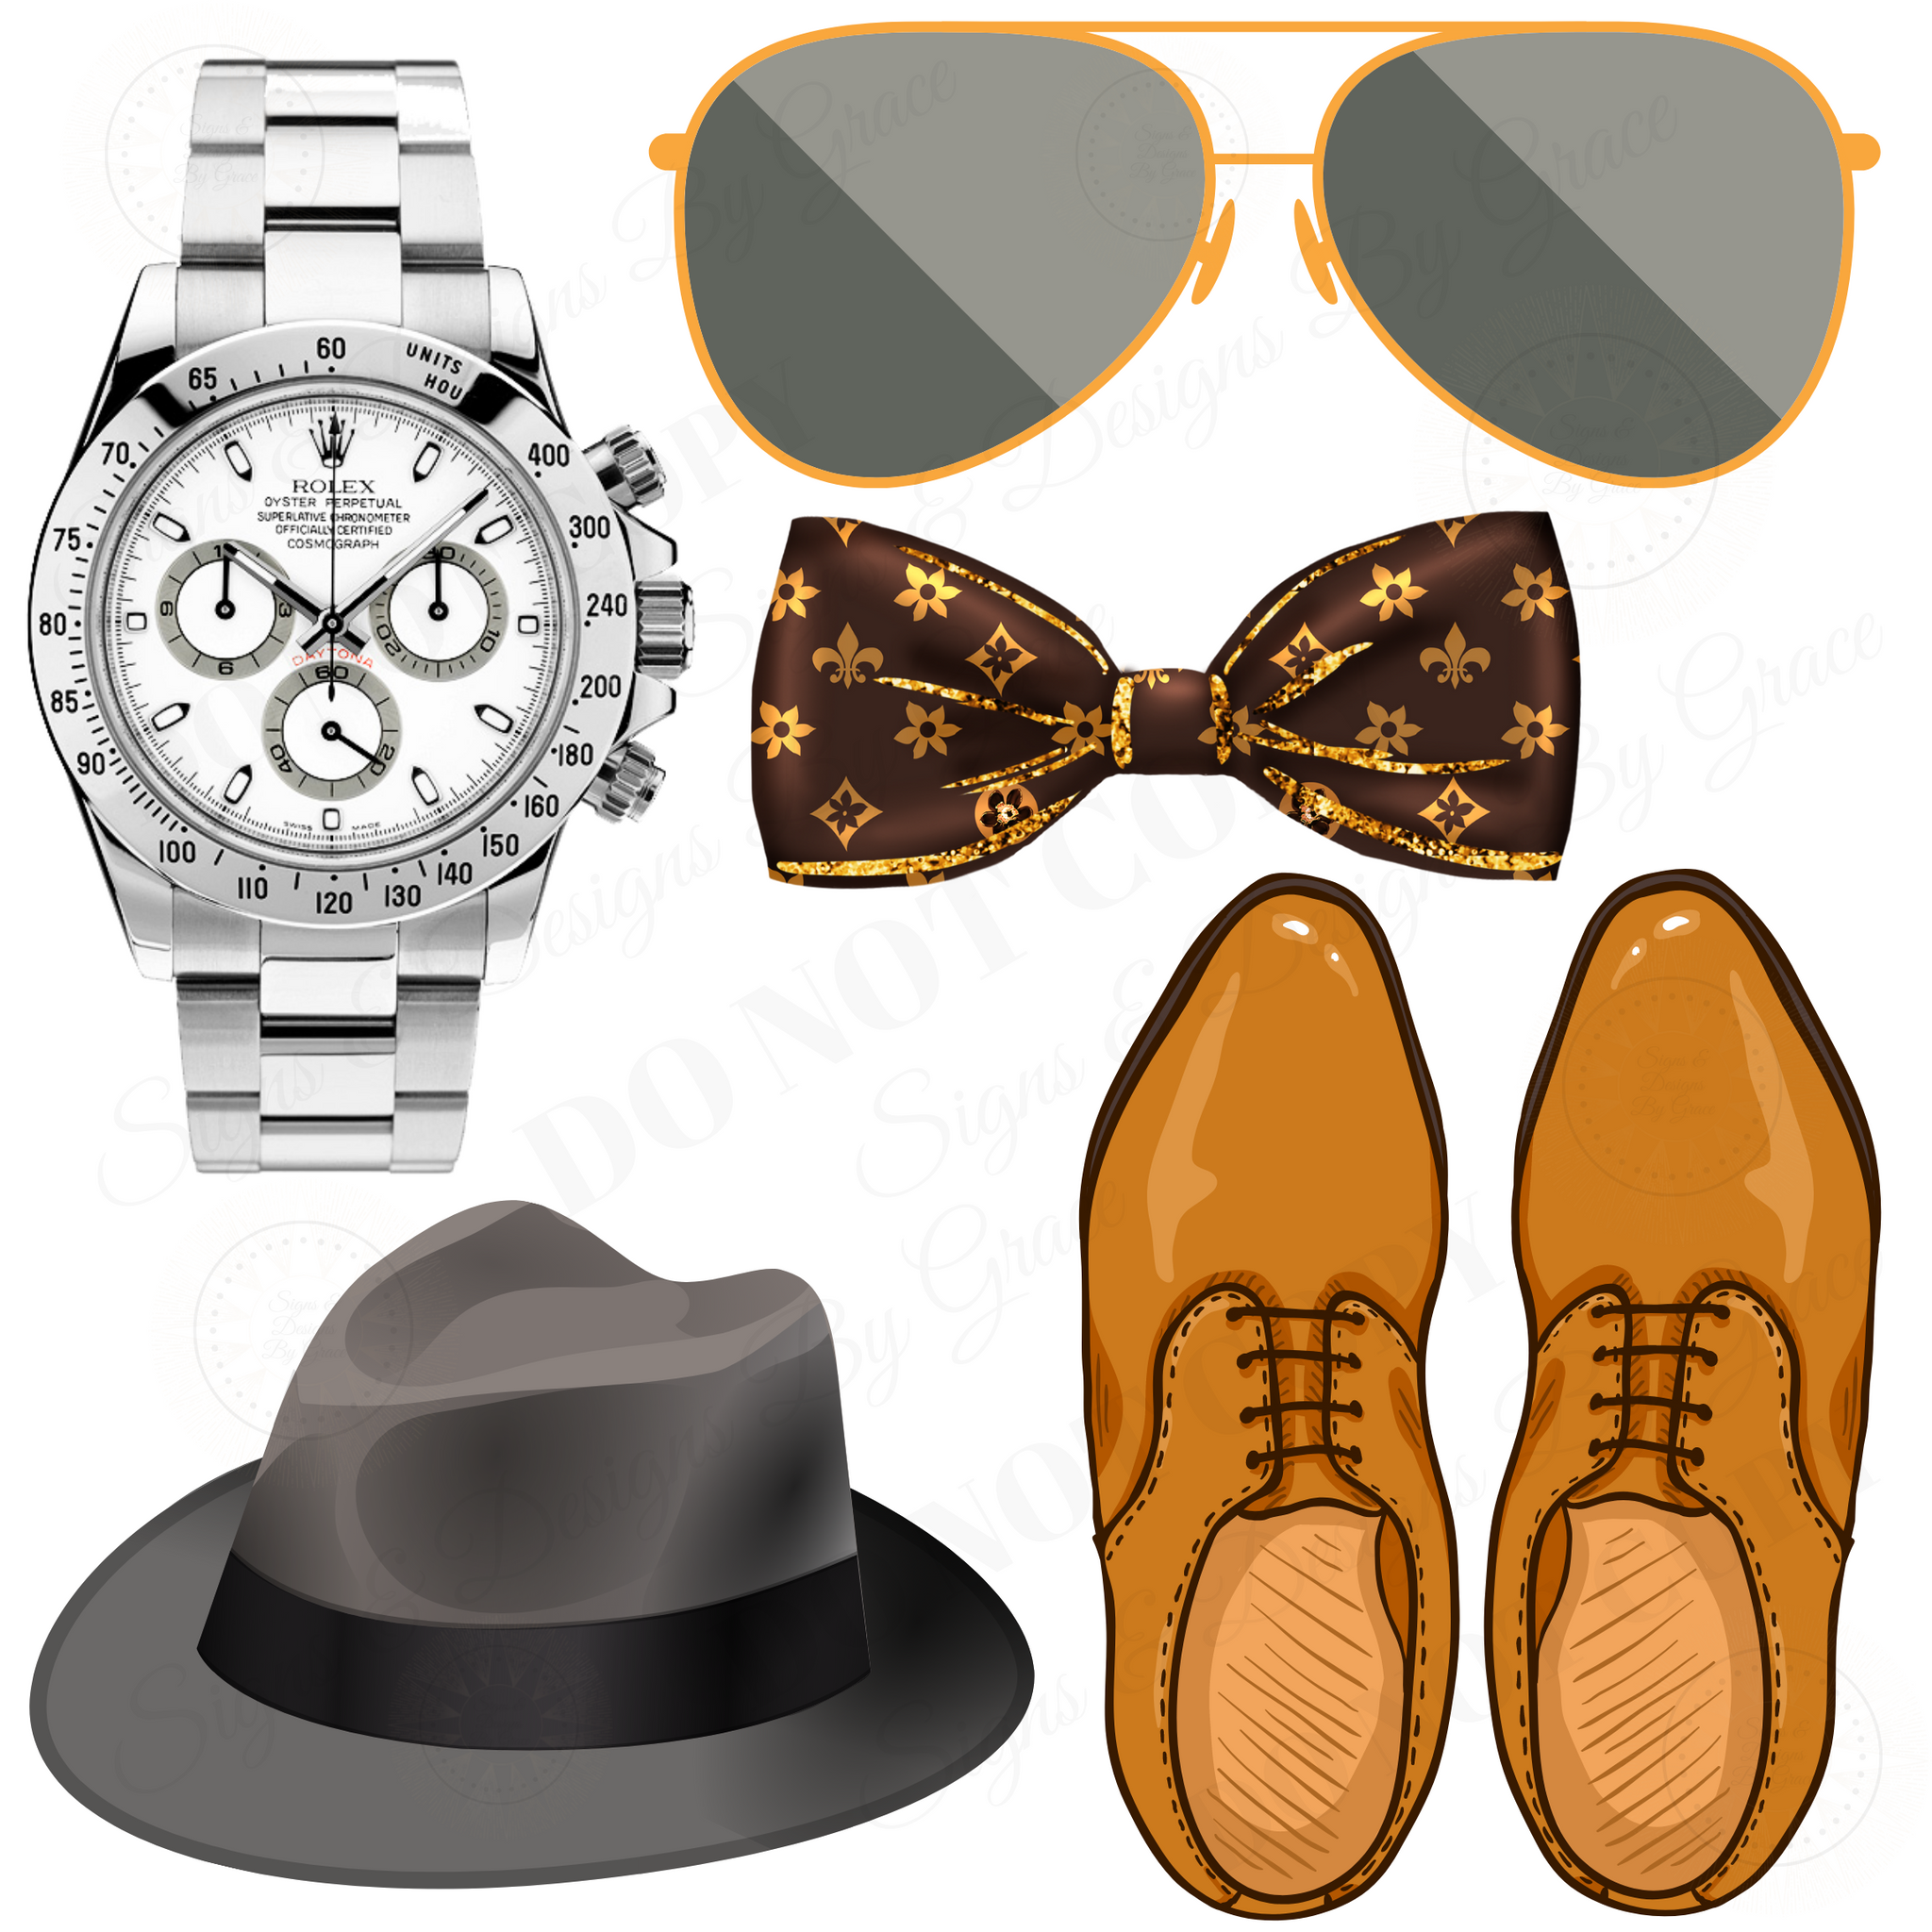 MENS shoes shades hat watch